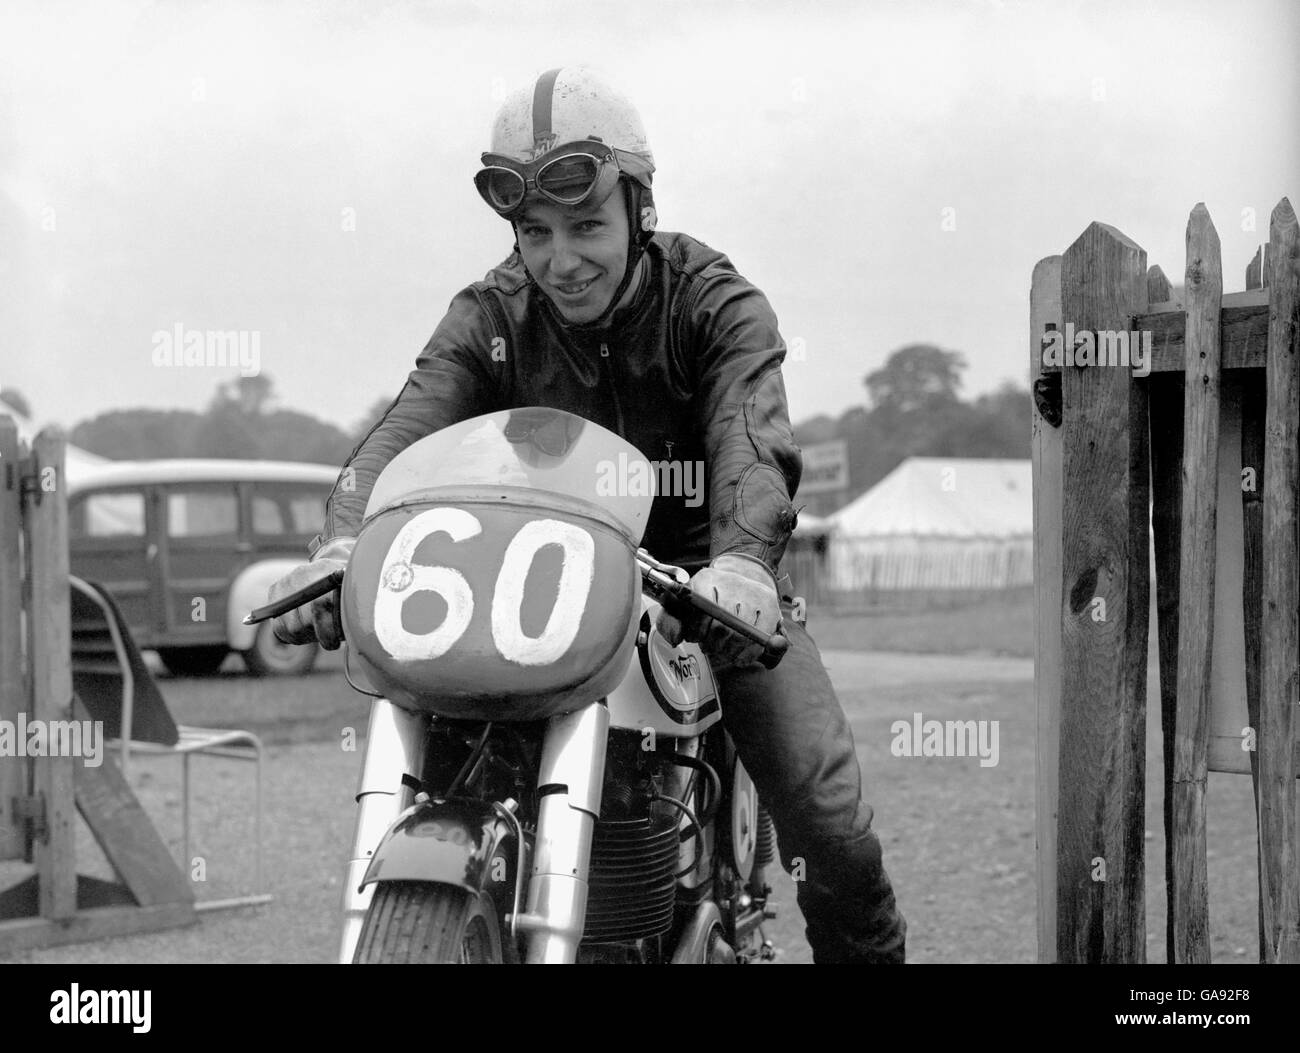 John Surtees on one of his own Norton bikes, which he raced independently at the Crystal Palace circuit, despite being contracted to ride for MV Augusta. He was to win in the 250cc, 350cc and 500cc classes and in each he broke the existing speed records. Stock Photo